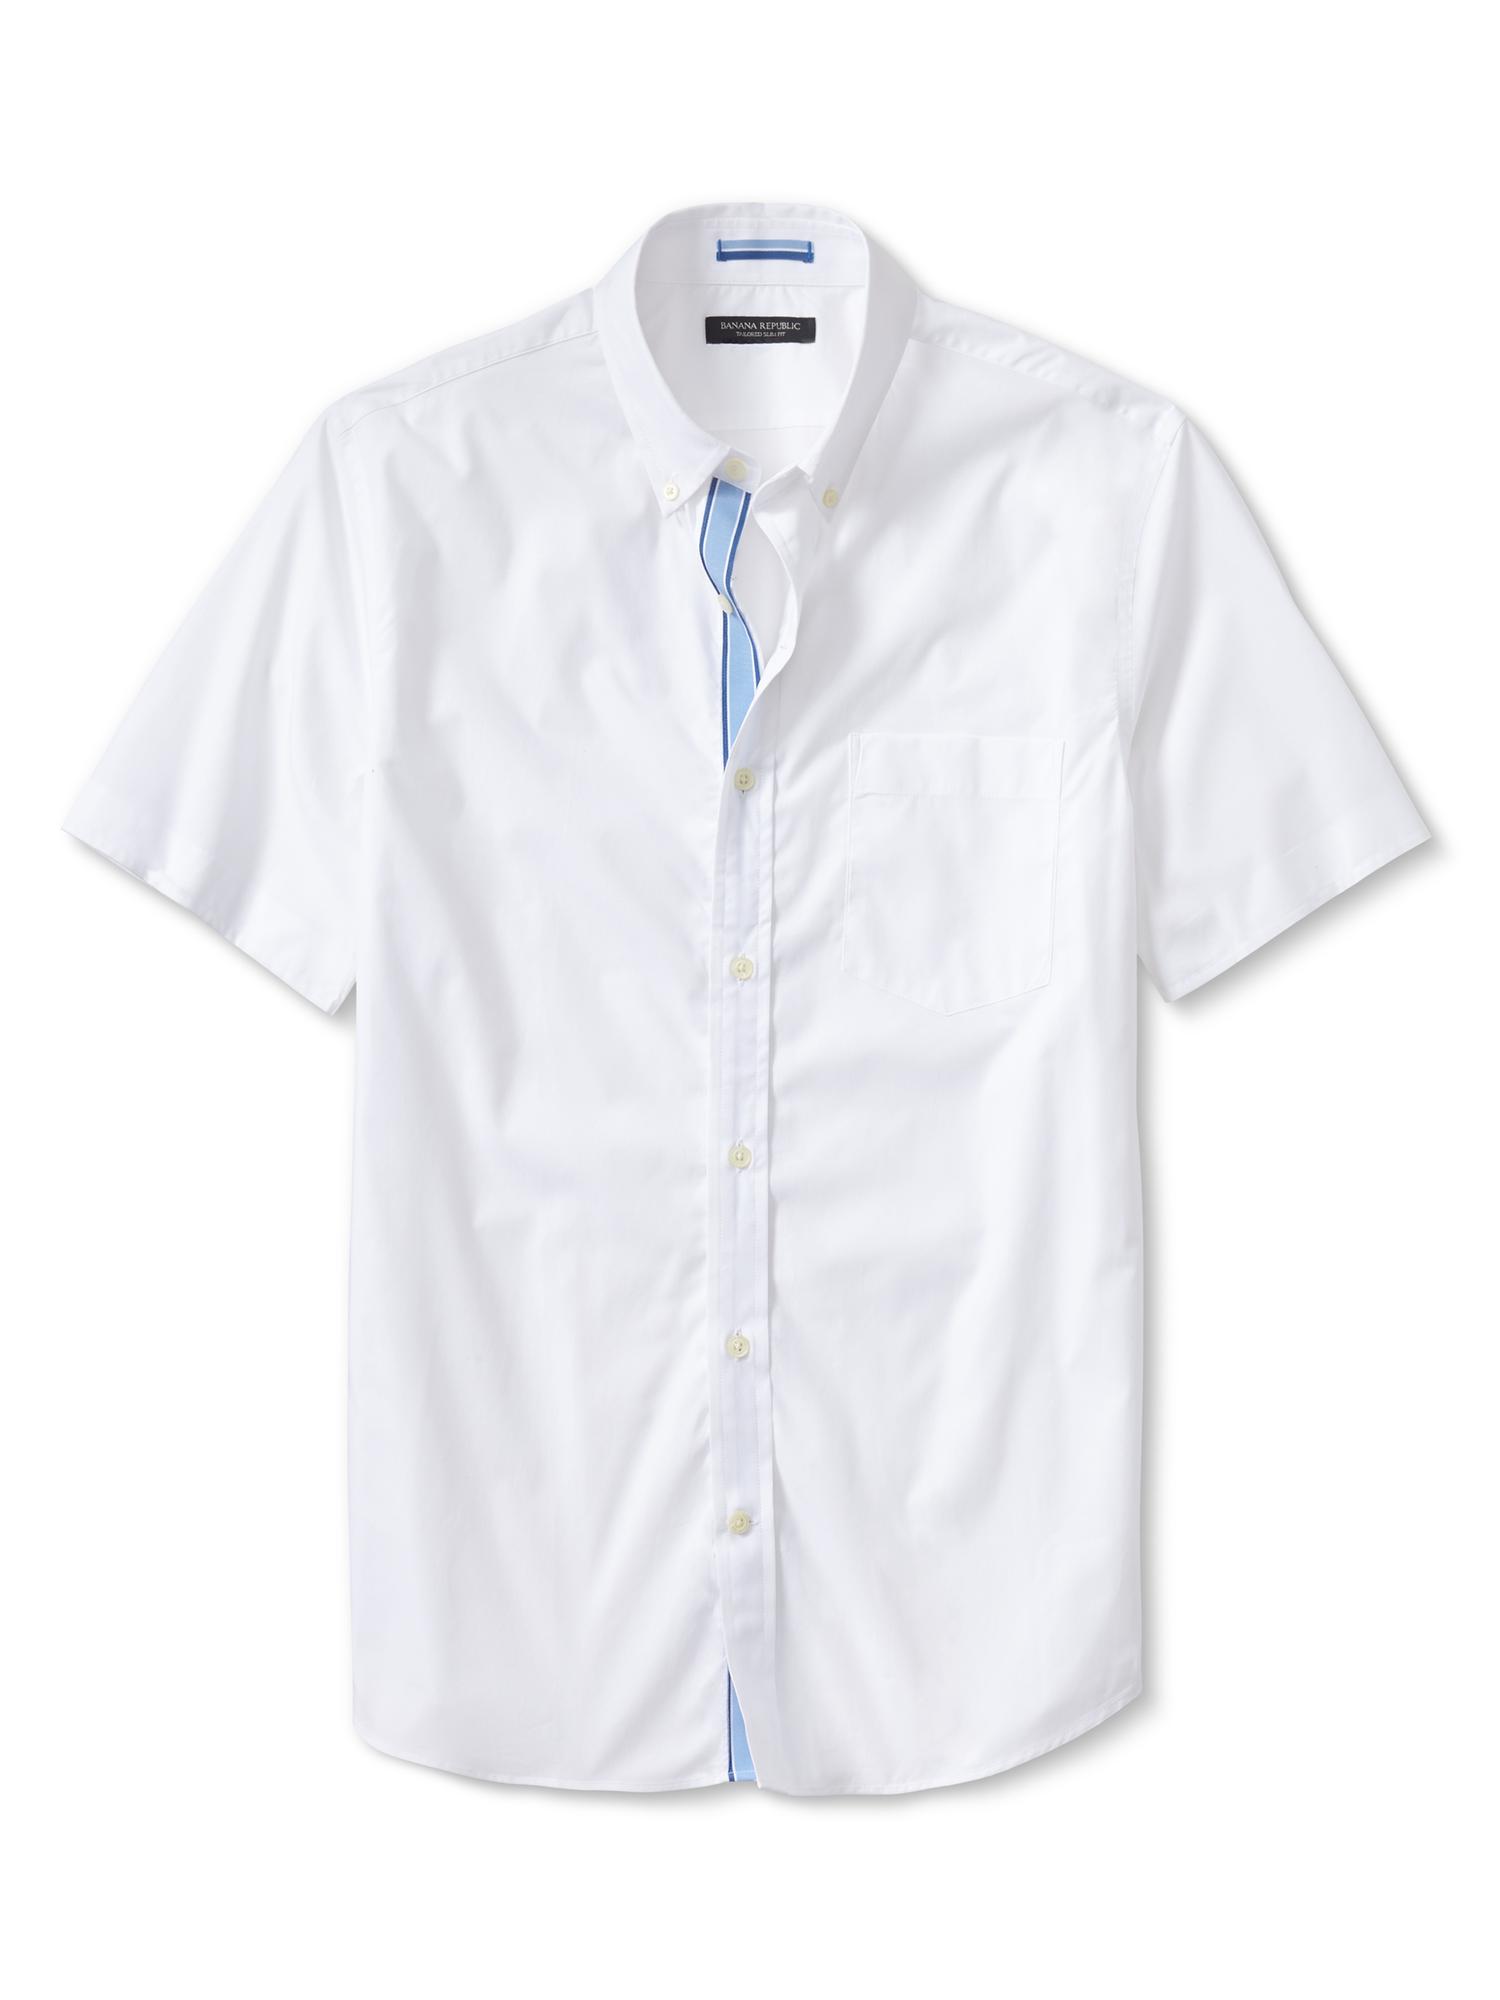 Tailored Slim-Fit Button-Down Short-Sleeve Shirt